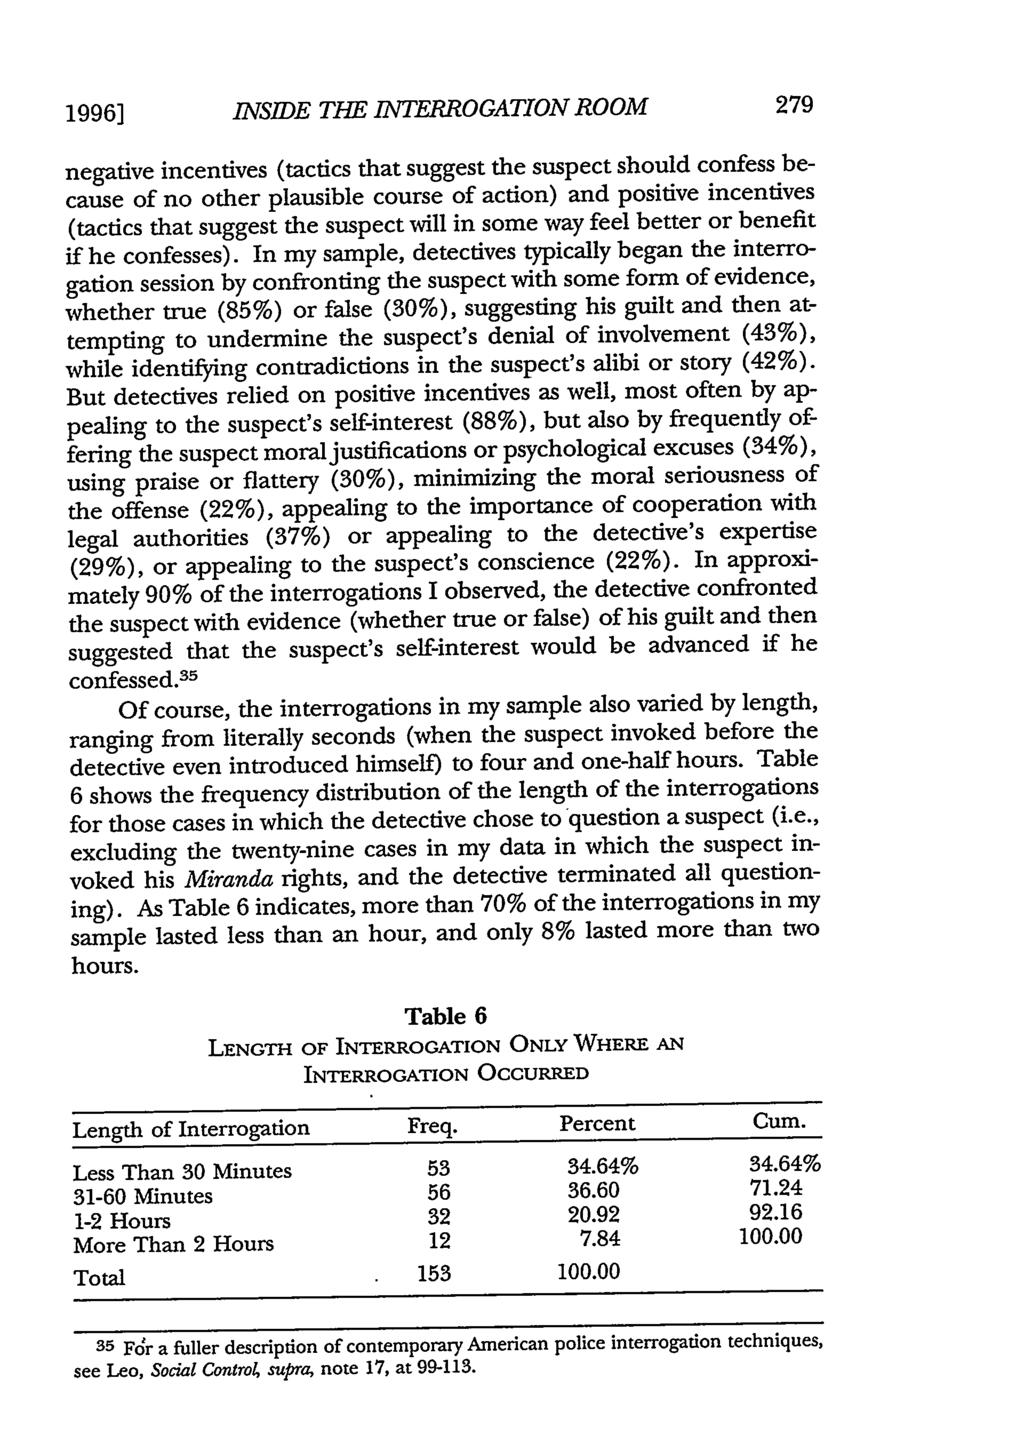 1996] INS1DE THE INTERROGATION ROOM negative incentives (tactics that suggest the suspect should confess because of no other plausible course of action) and positive incentives (tactics that suggest